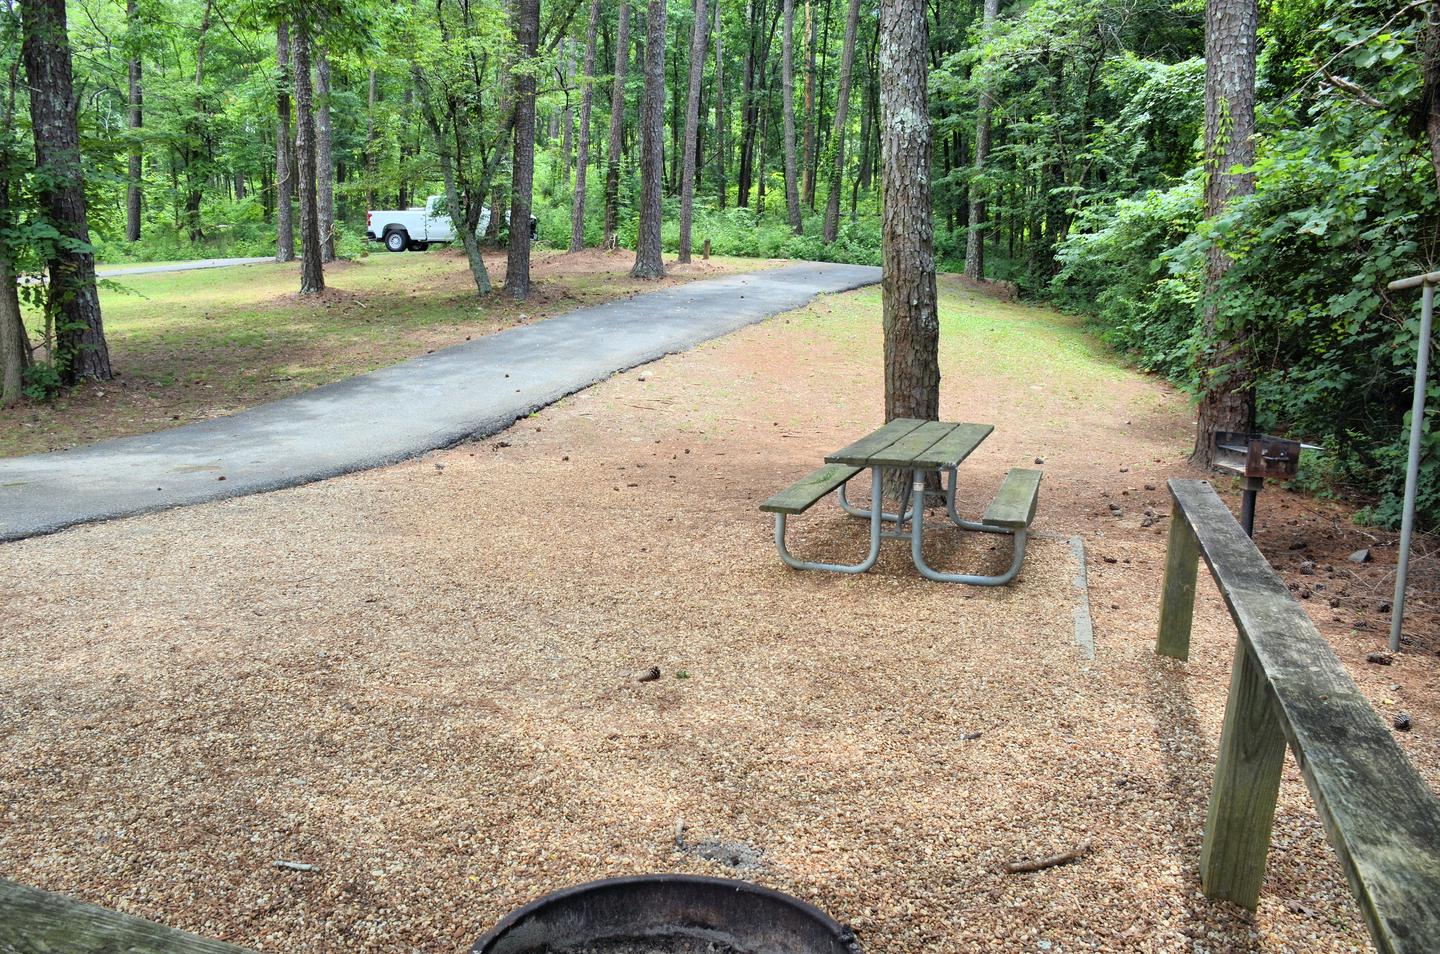 Driveway slope..Old Highway 41 #3 Campground Campsite 45. Looking from campsite up to road.